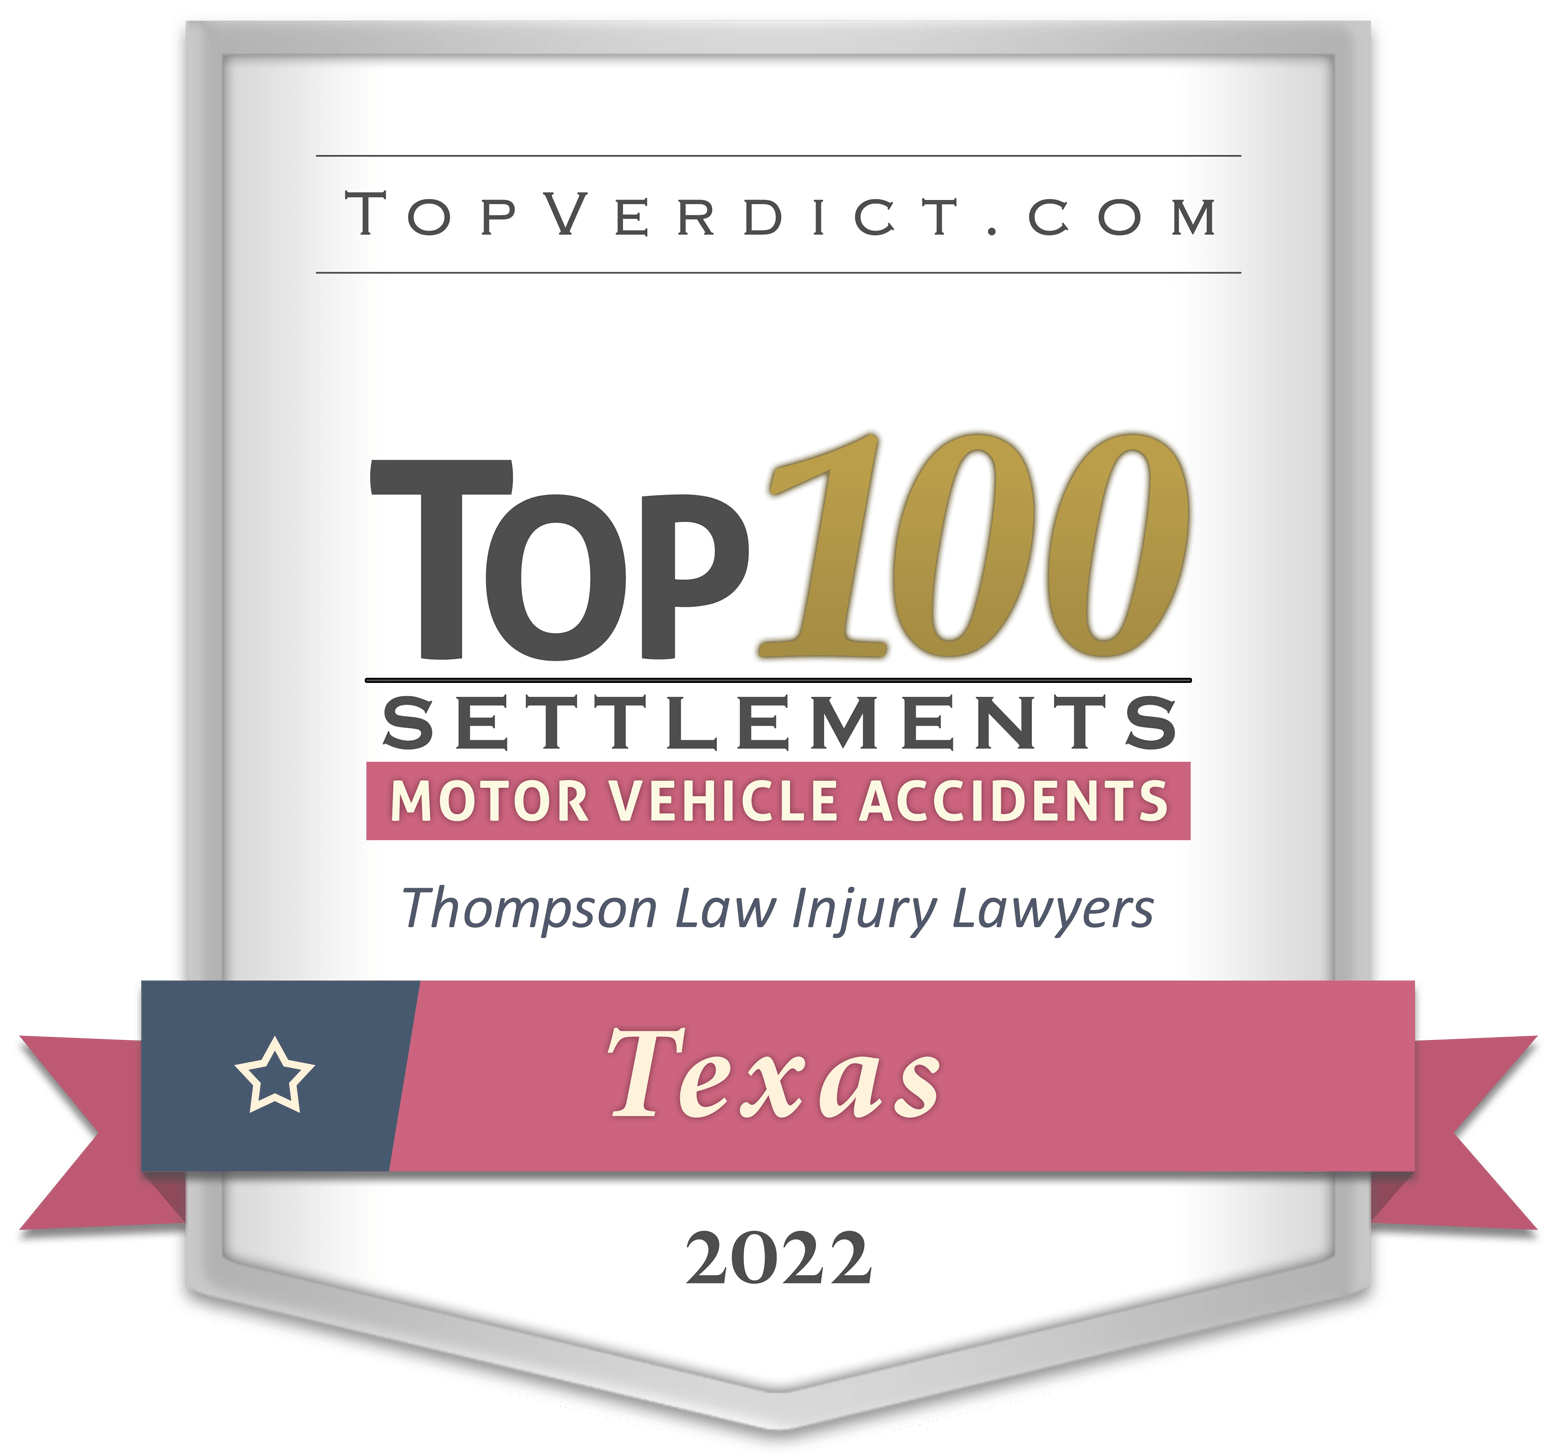 TopVerdict Top 100 motor vehicle accident settlements in Texas 2022 badge - Pearland Personal Injury Lawyers